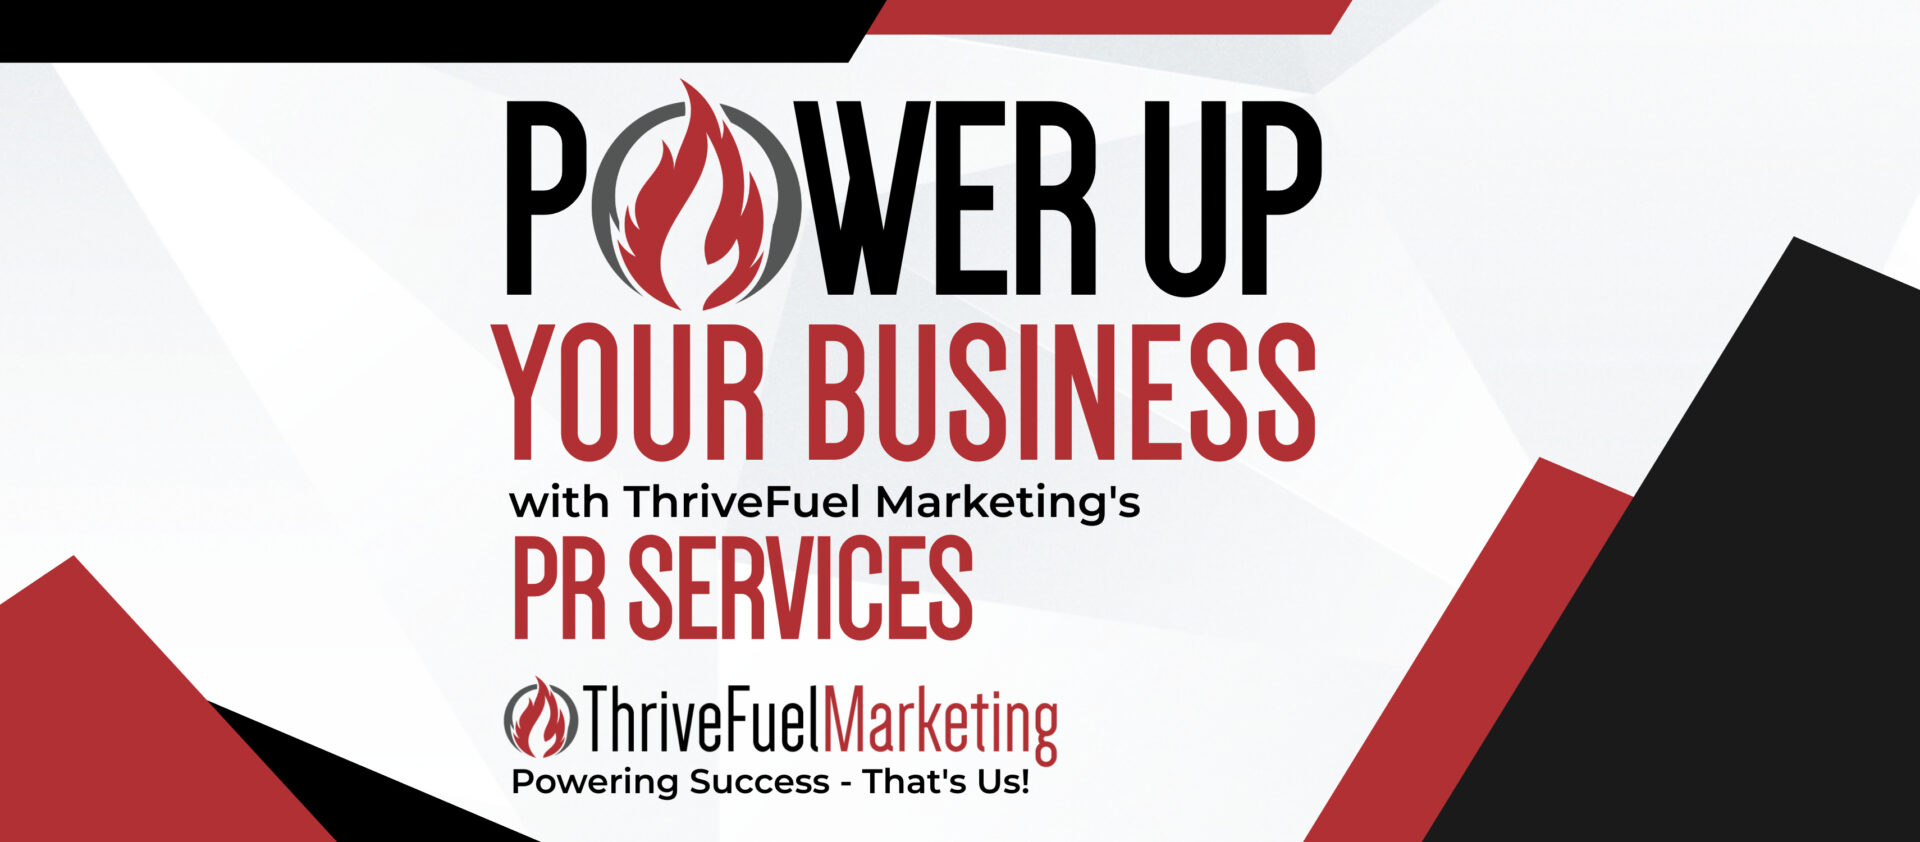 Power Up Your Business with ThriveFuel Marketing’s PR Services